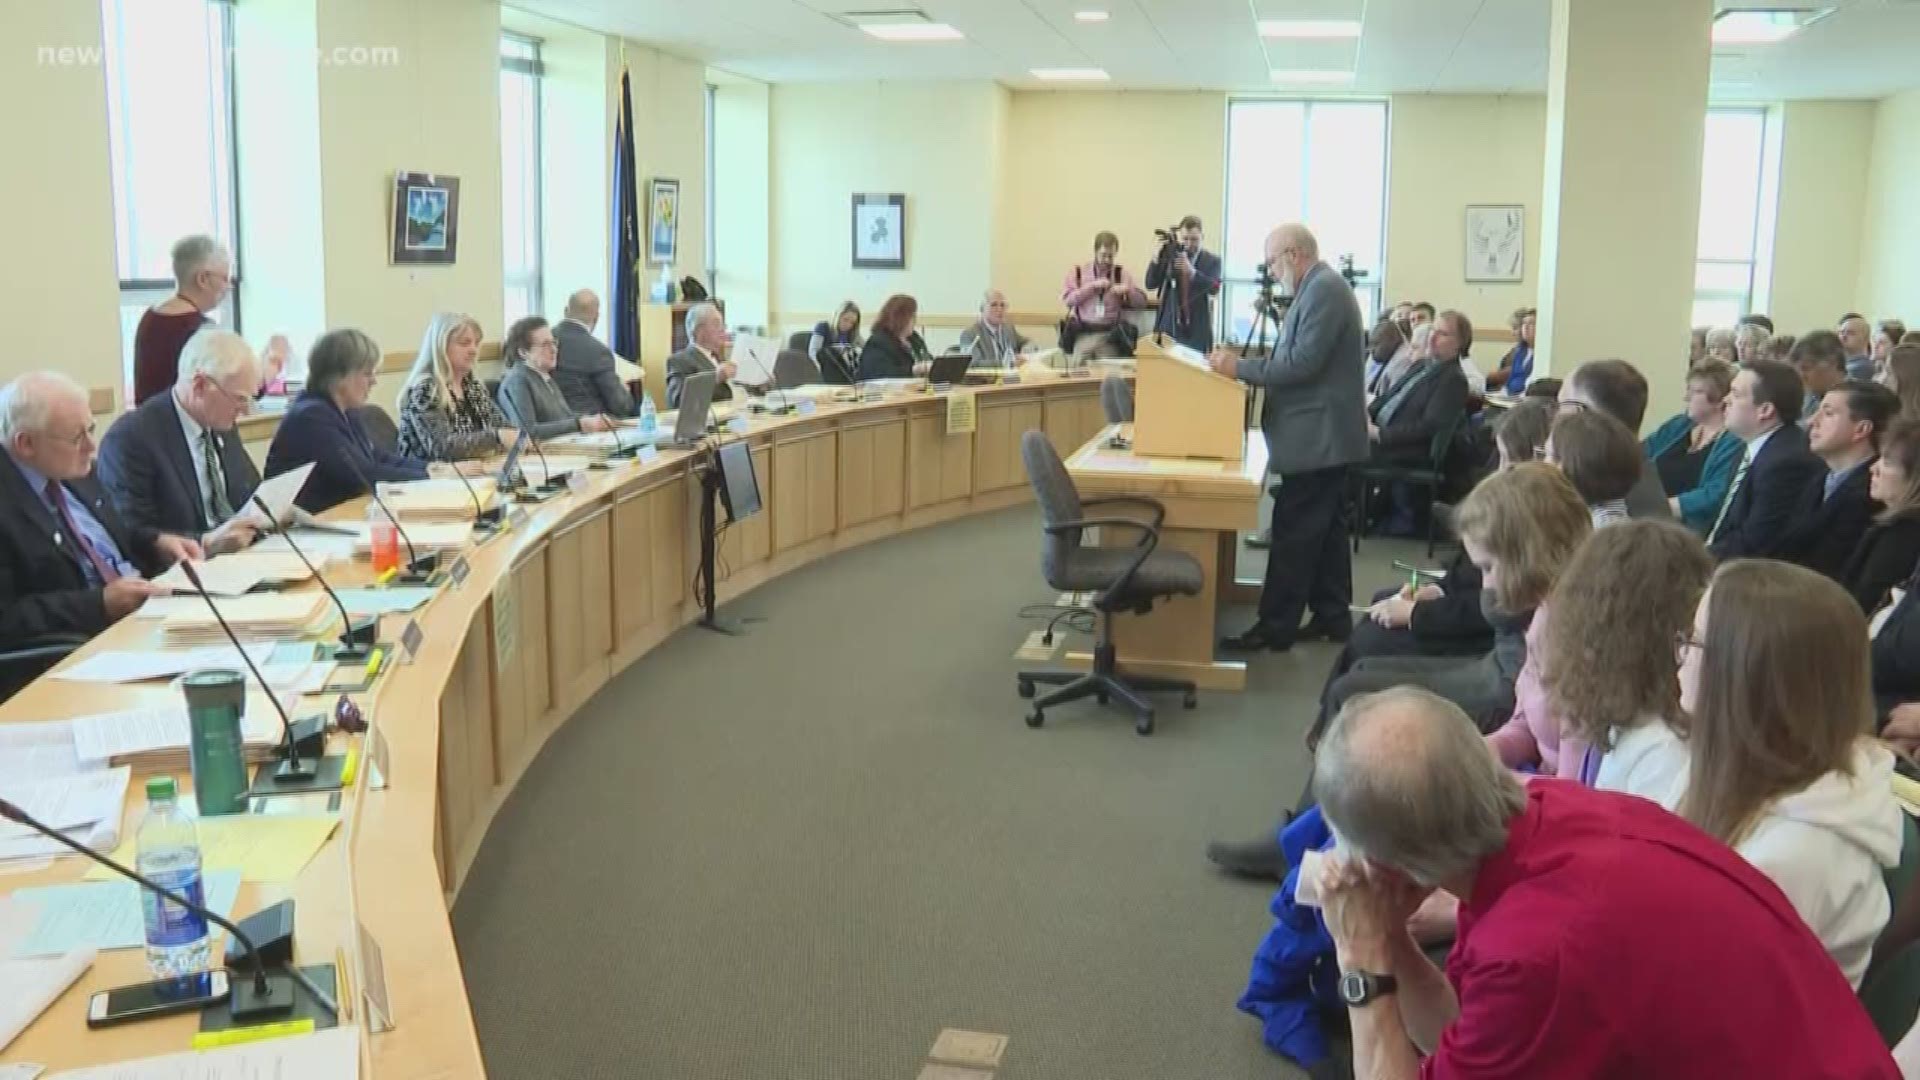 Mainers and Legislators met at the State House Wednesday to discuss a new bill that would make it more difficult for parents to opt out of vaccinating their children.